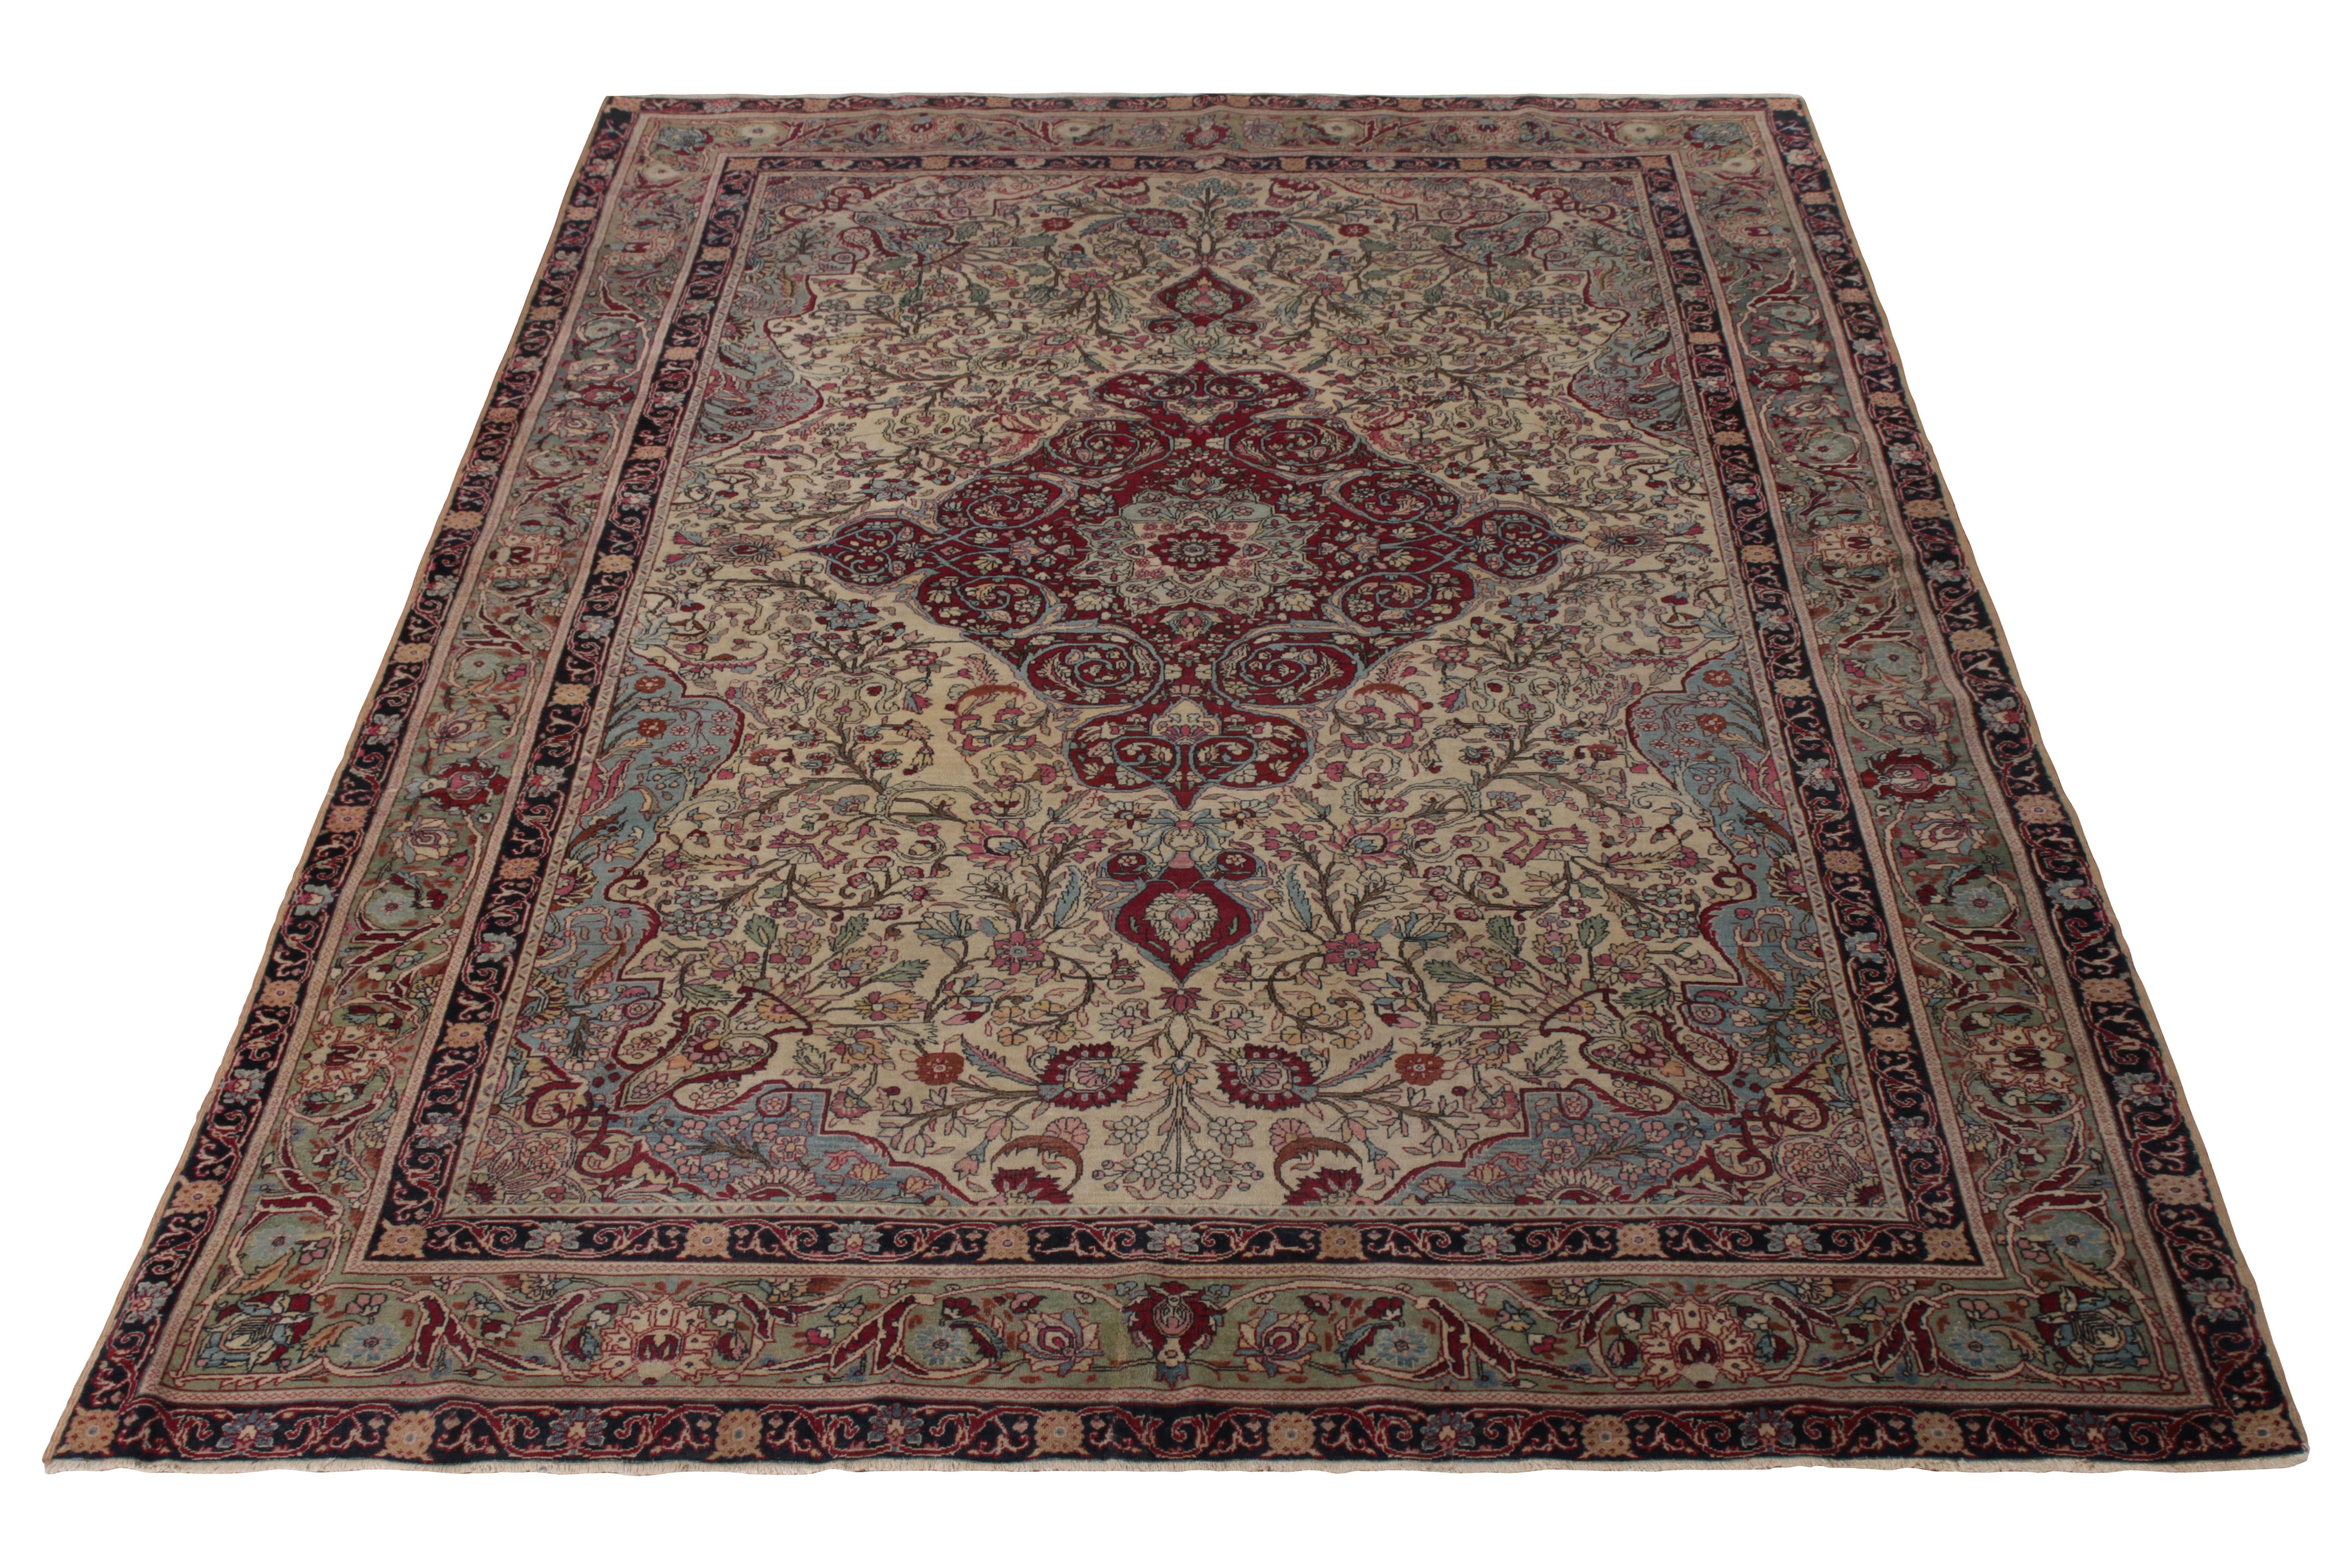 A 6x11 antique Persian rug of Isfahan origin, employing blue, red, and beige in hand-knotted wool originating circa 1920-1930. 

On the design: The play of burgundy and blue enjoys fabulous depth in marrying medallion and islimi patterns of